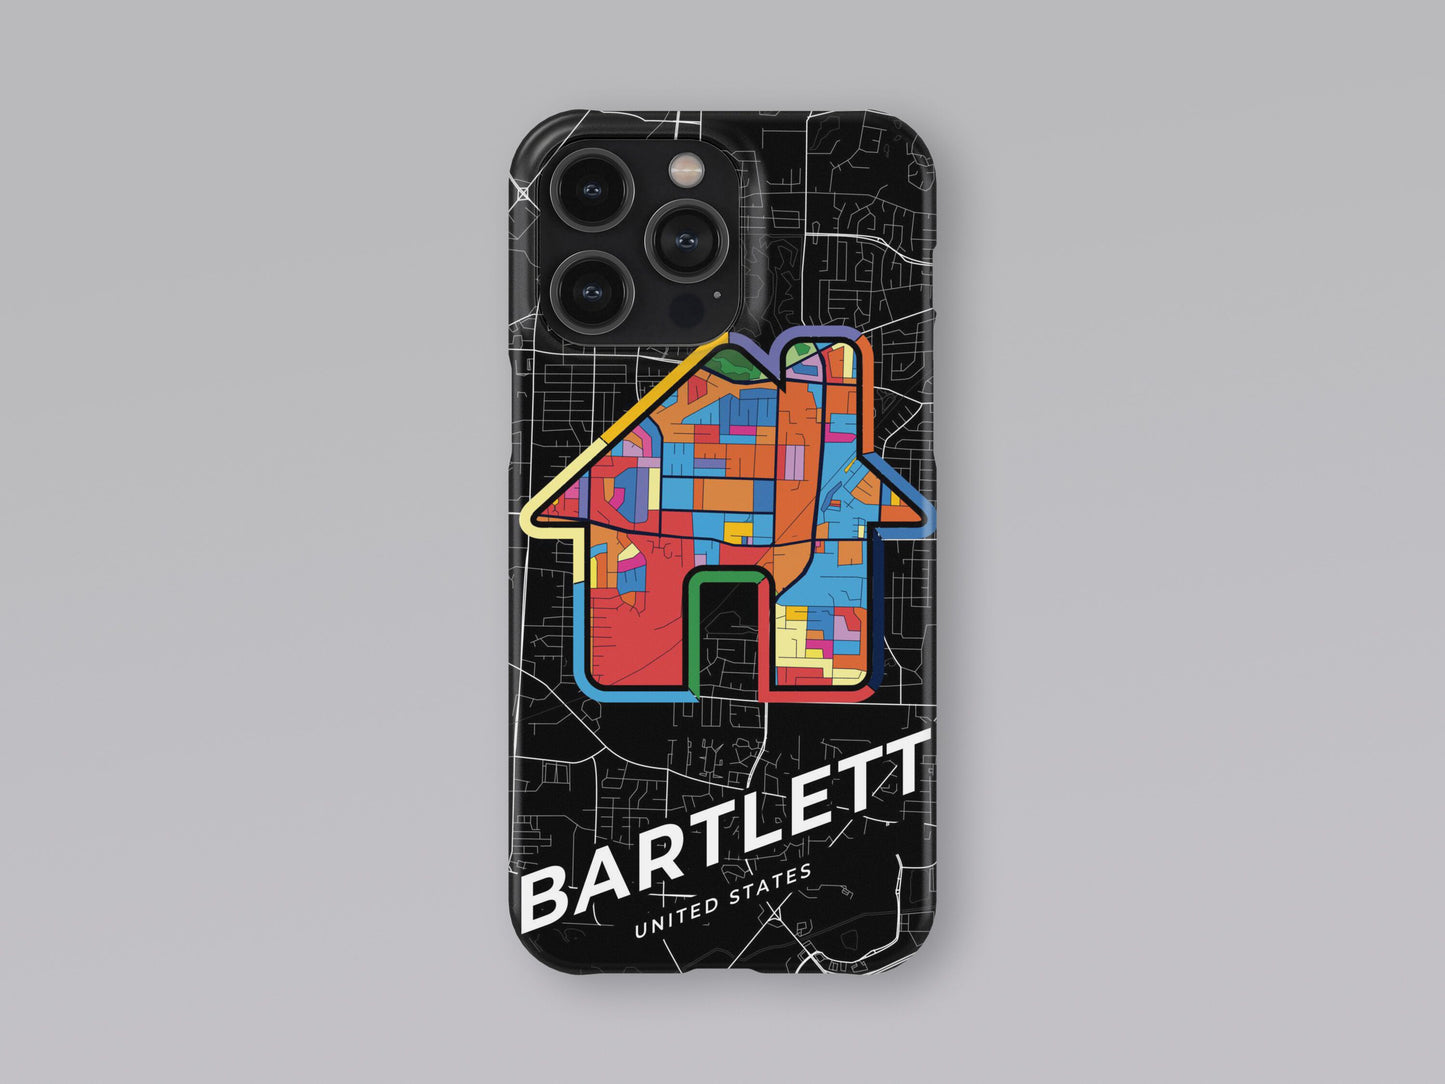 Bartlett Tennessee slim phone case with colorful icon. Birthday, wedding or housewarming gift. Couple match cases. 3